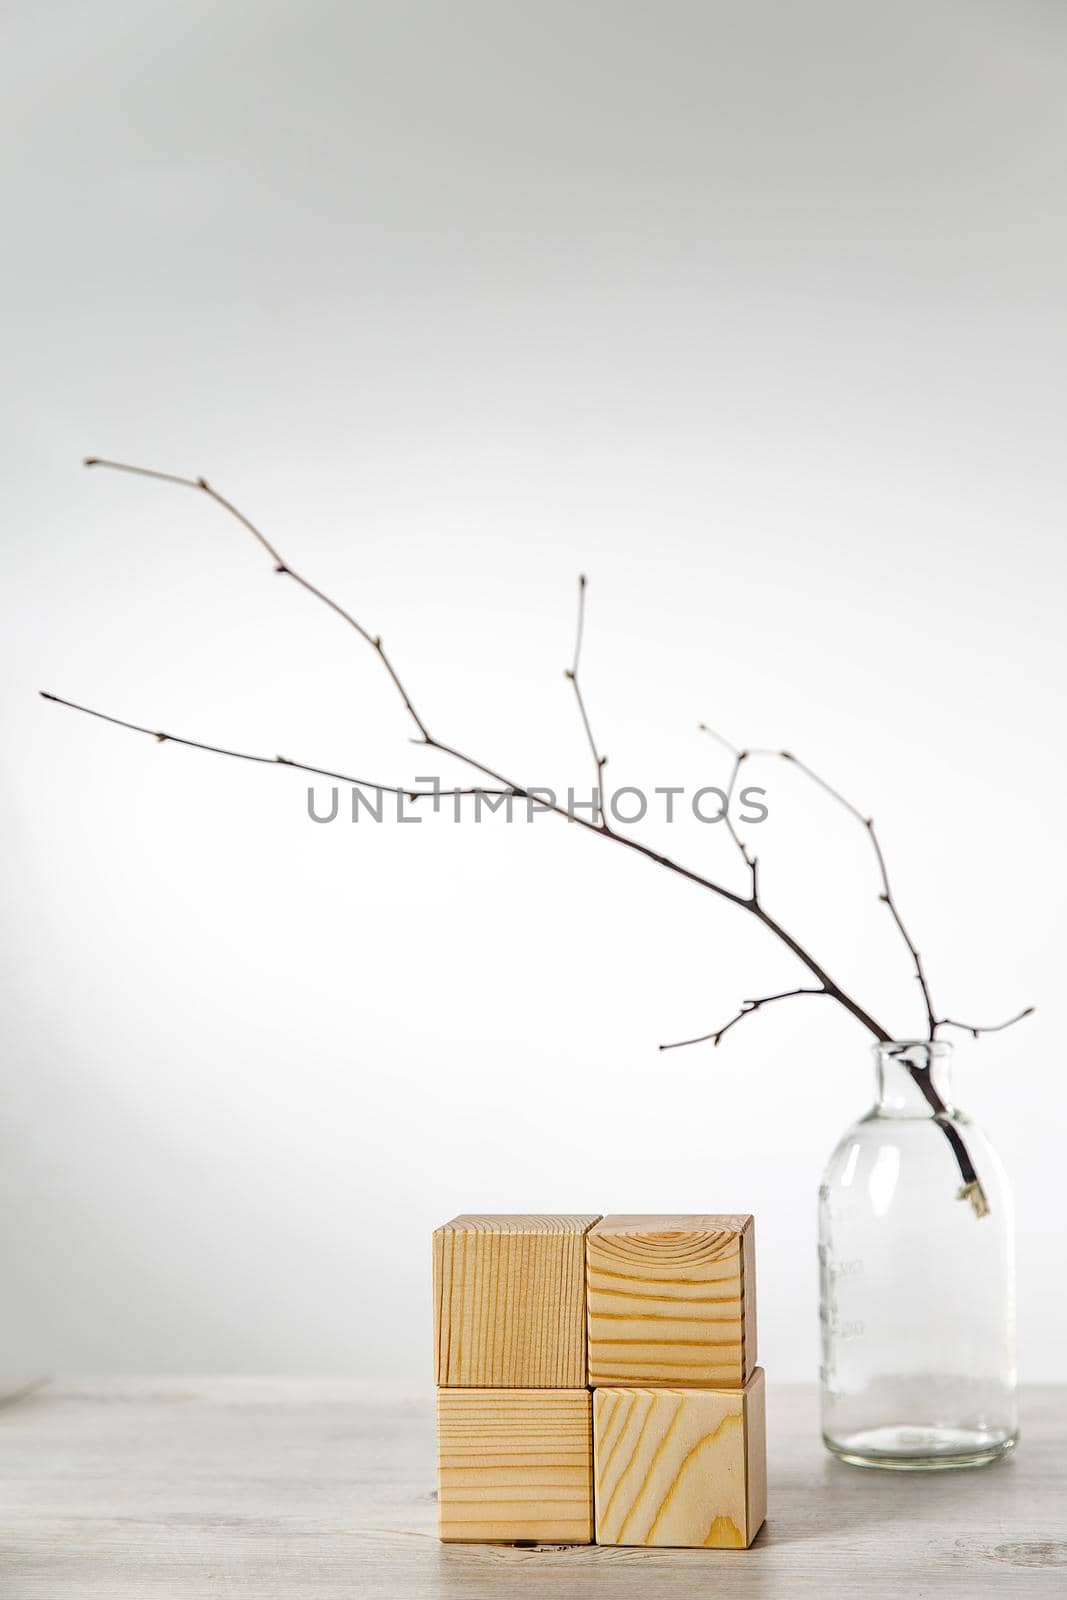 An unblown linden branch in a glass vase and four wooden cubes with space for text. Scandinavian style. Copy text